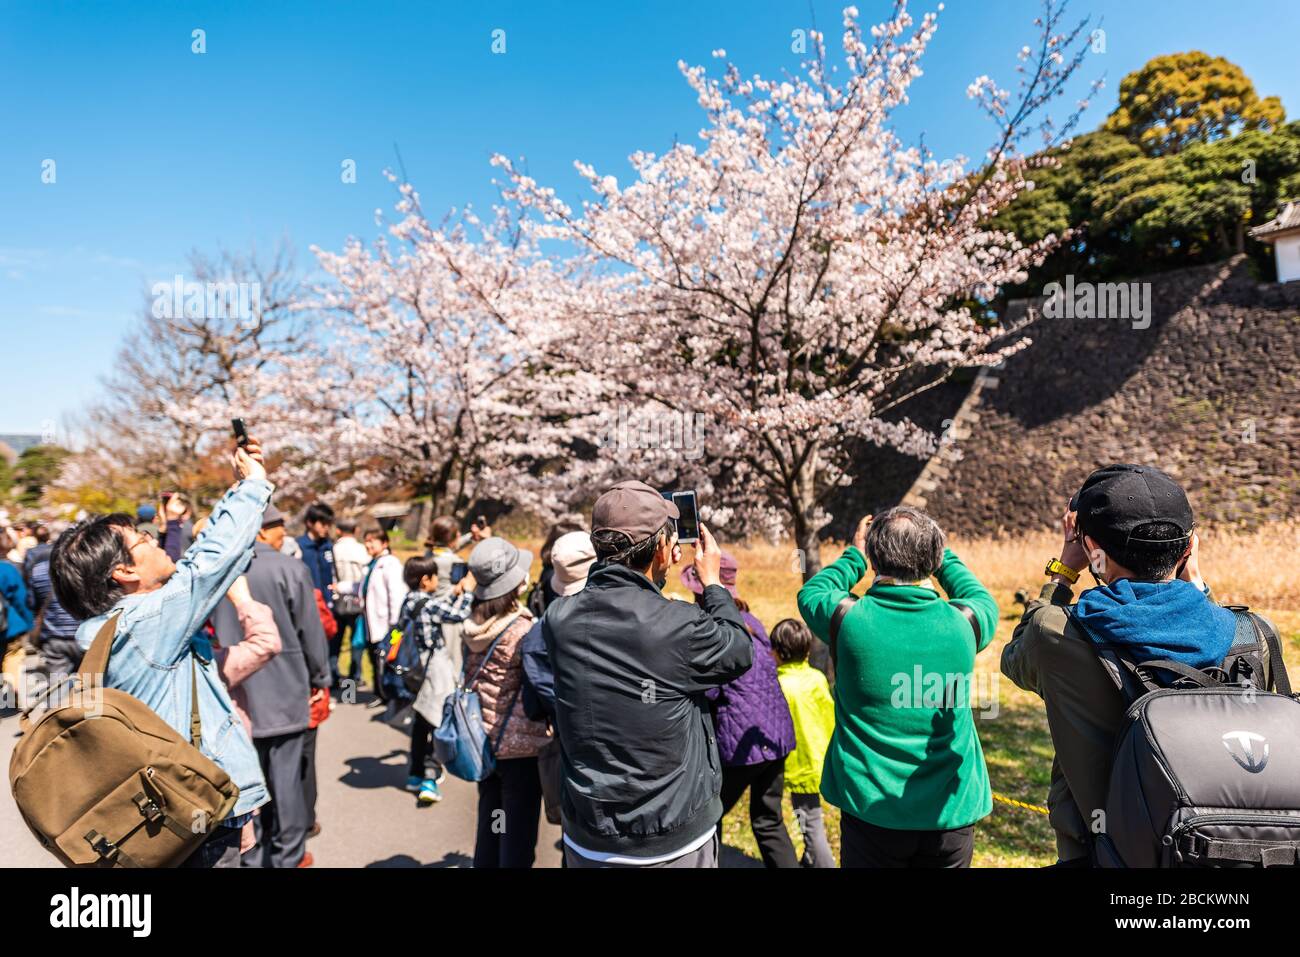 Tokyo, Japan - April 1, 2019: Imperial palace national gardens park with people taking photos, photographing cherry blossom sakura flowers on trees in Stock Photo